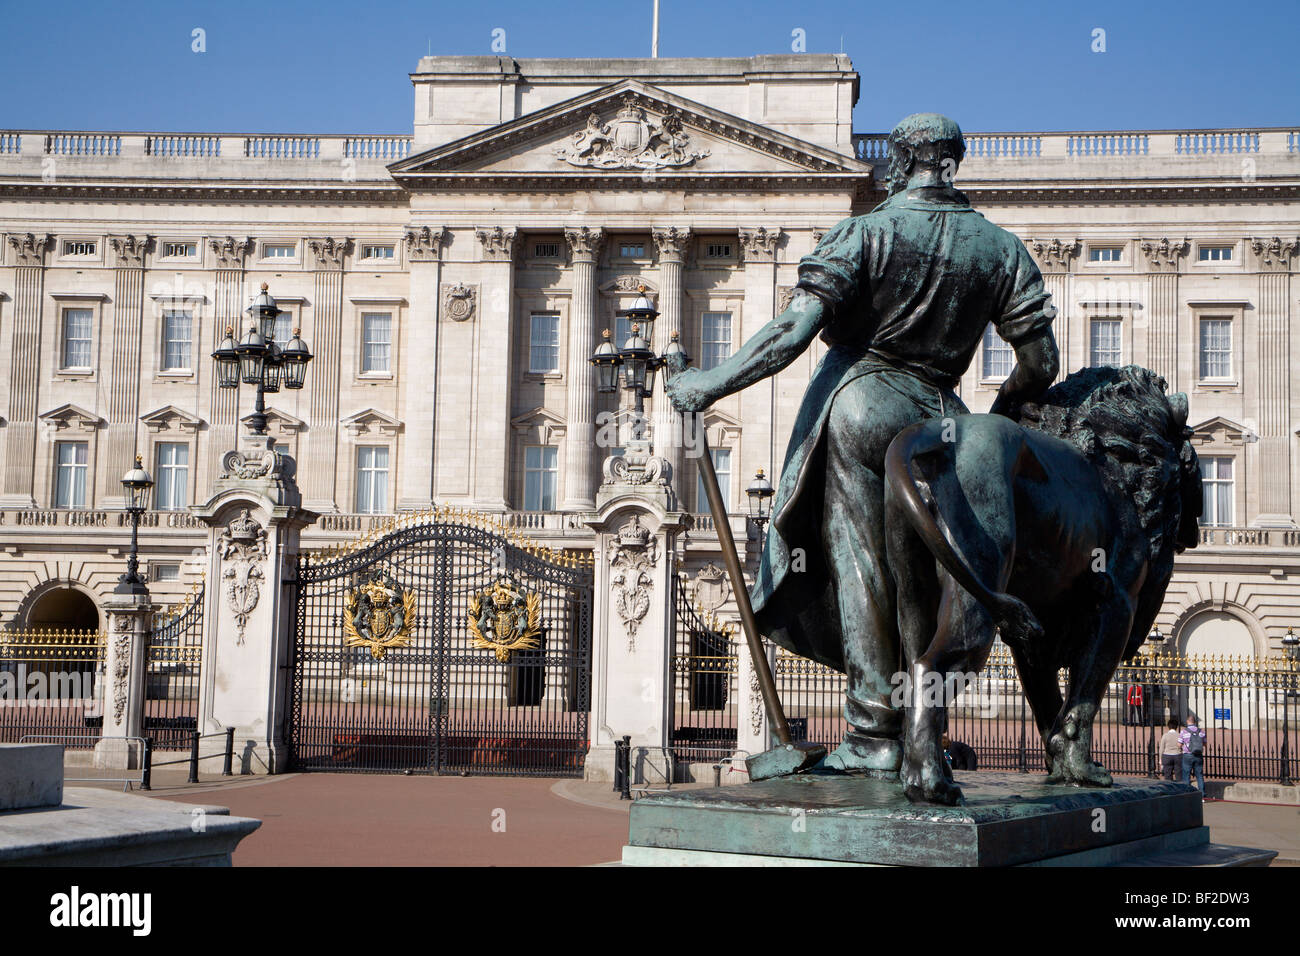 London - sculpture form Victoria monument and Buckingham palace Stock Photo